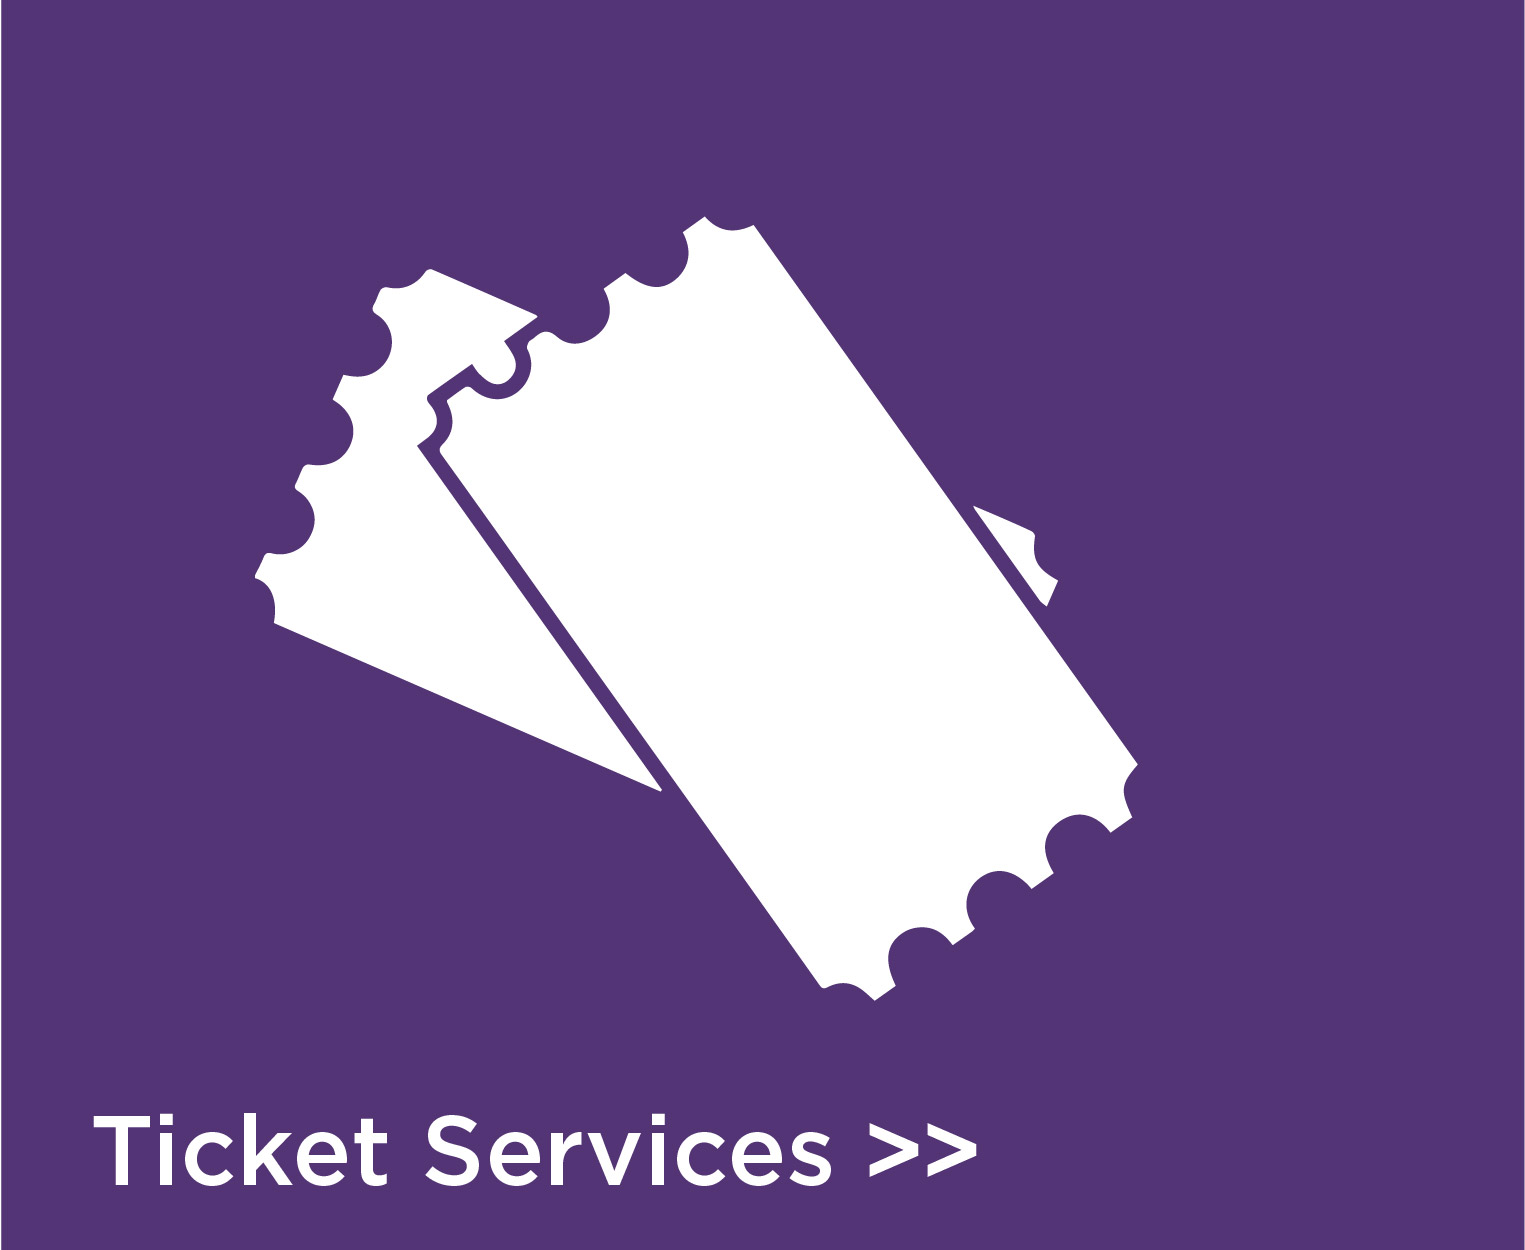 UC Ticket Services for events at UW-Whitewater